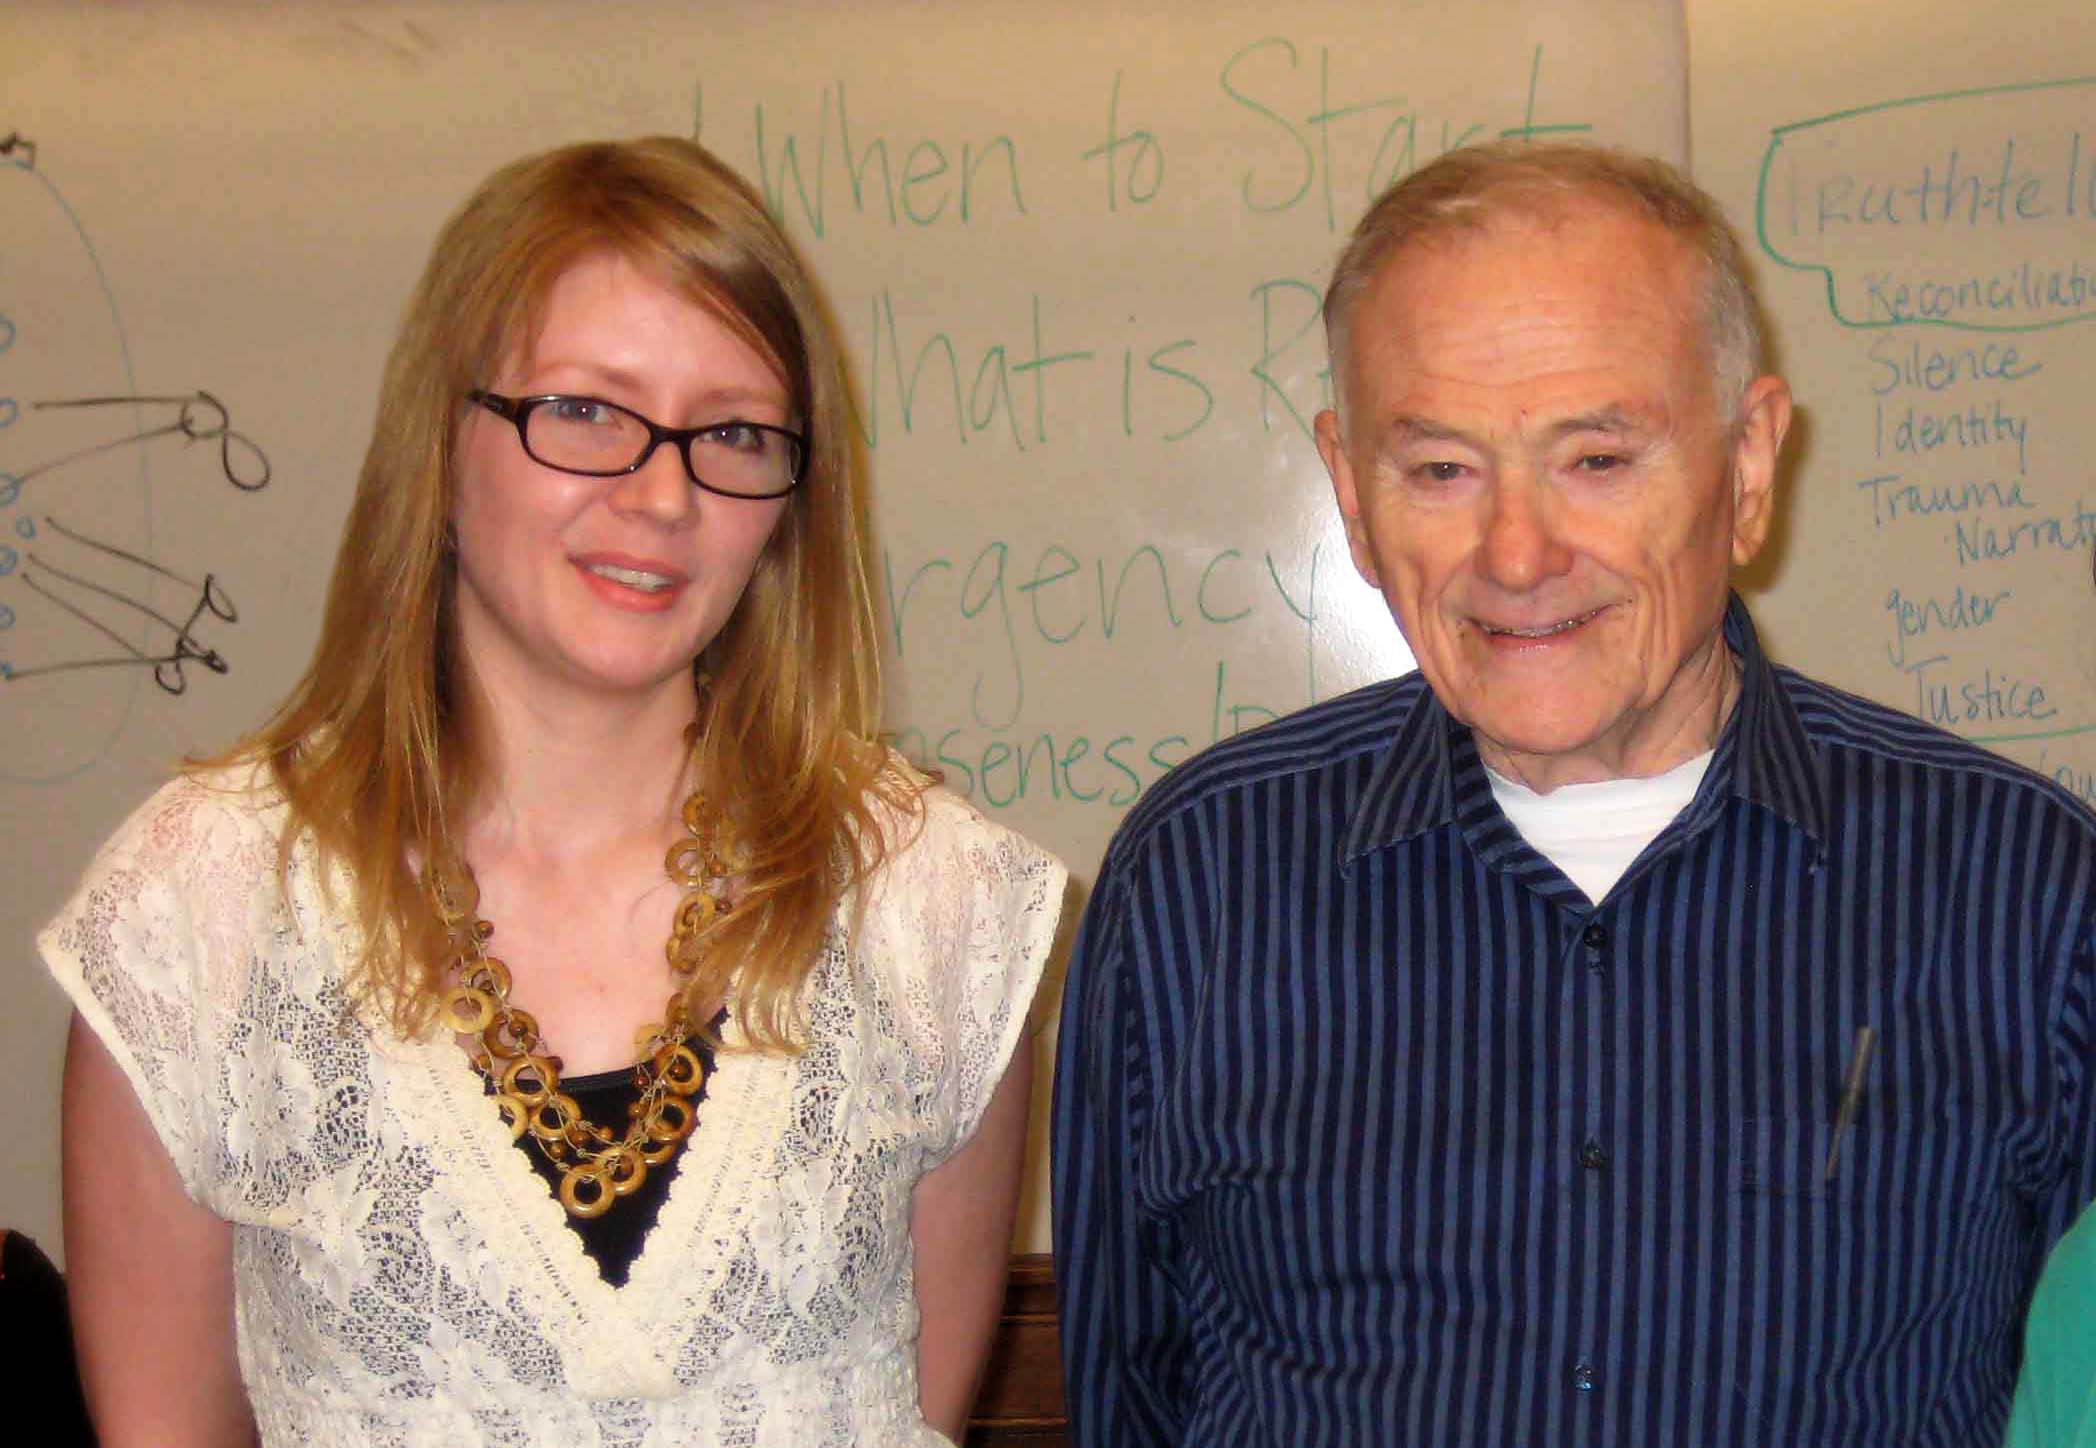 Photo of Allison Penner and Ron Grele, whiteboard with lettering in background.